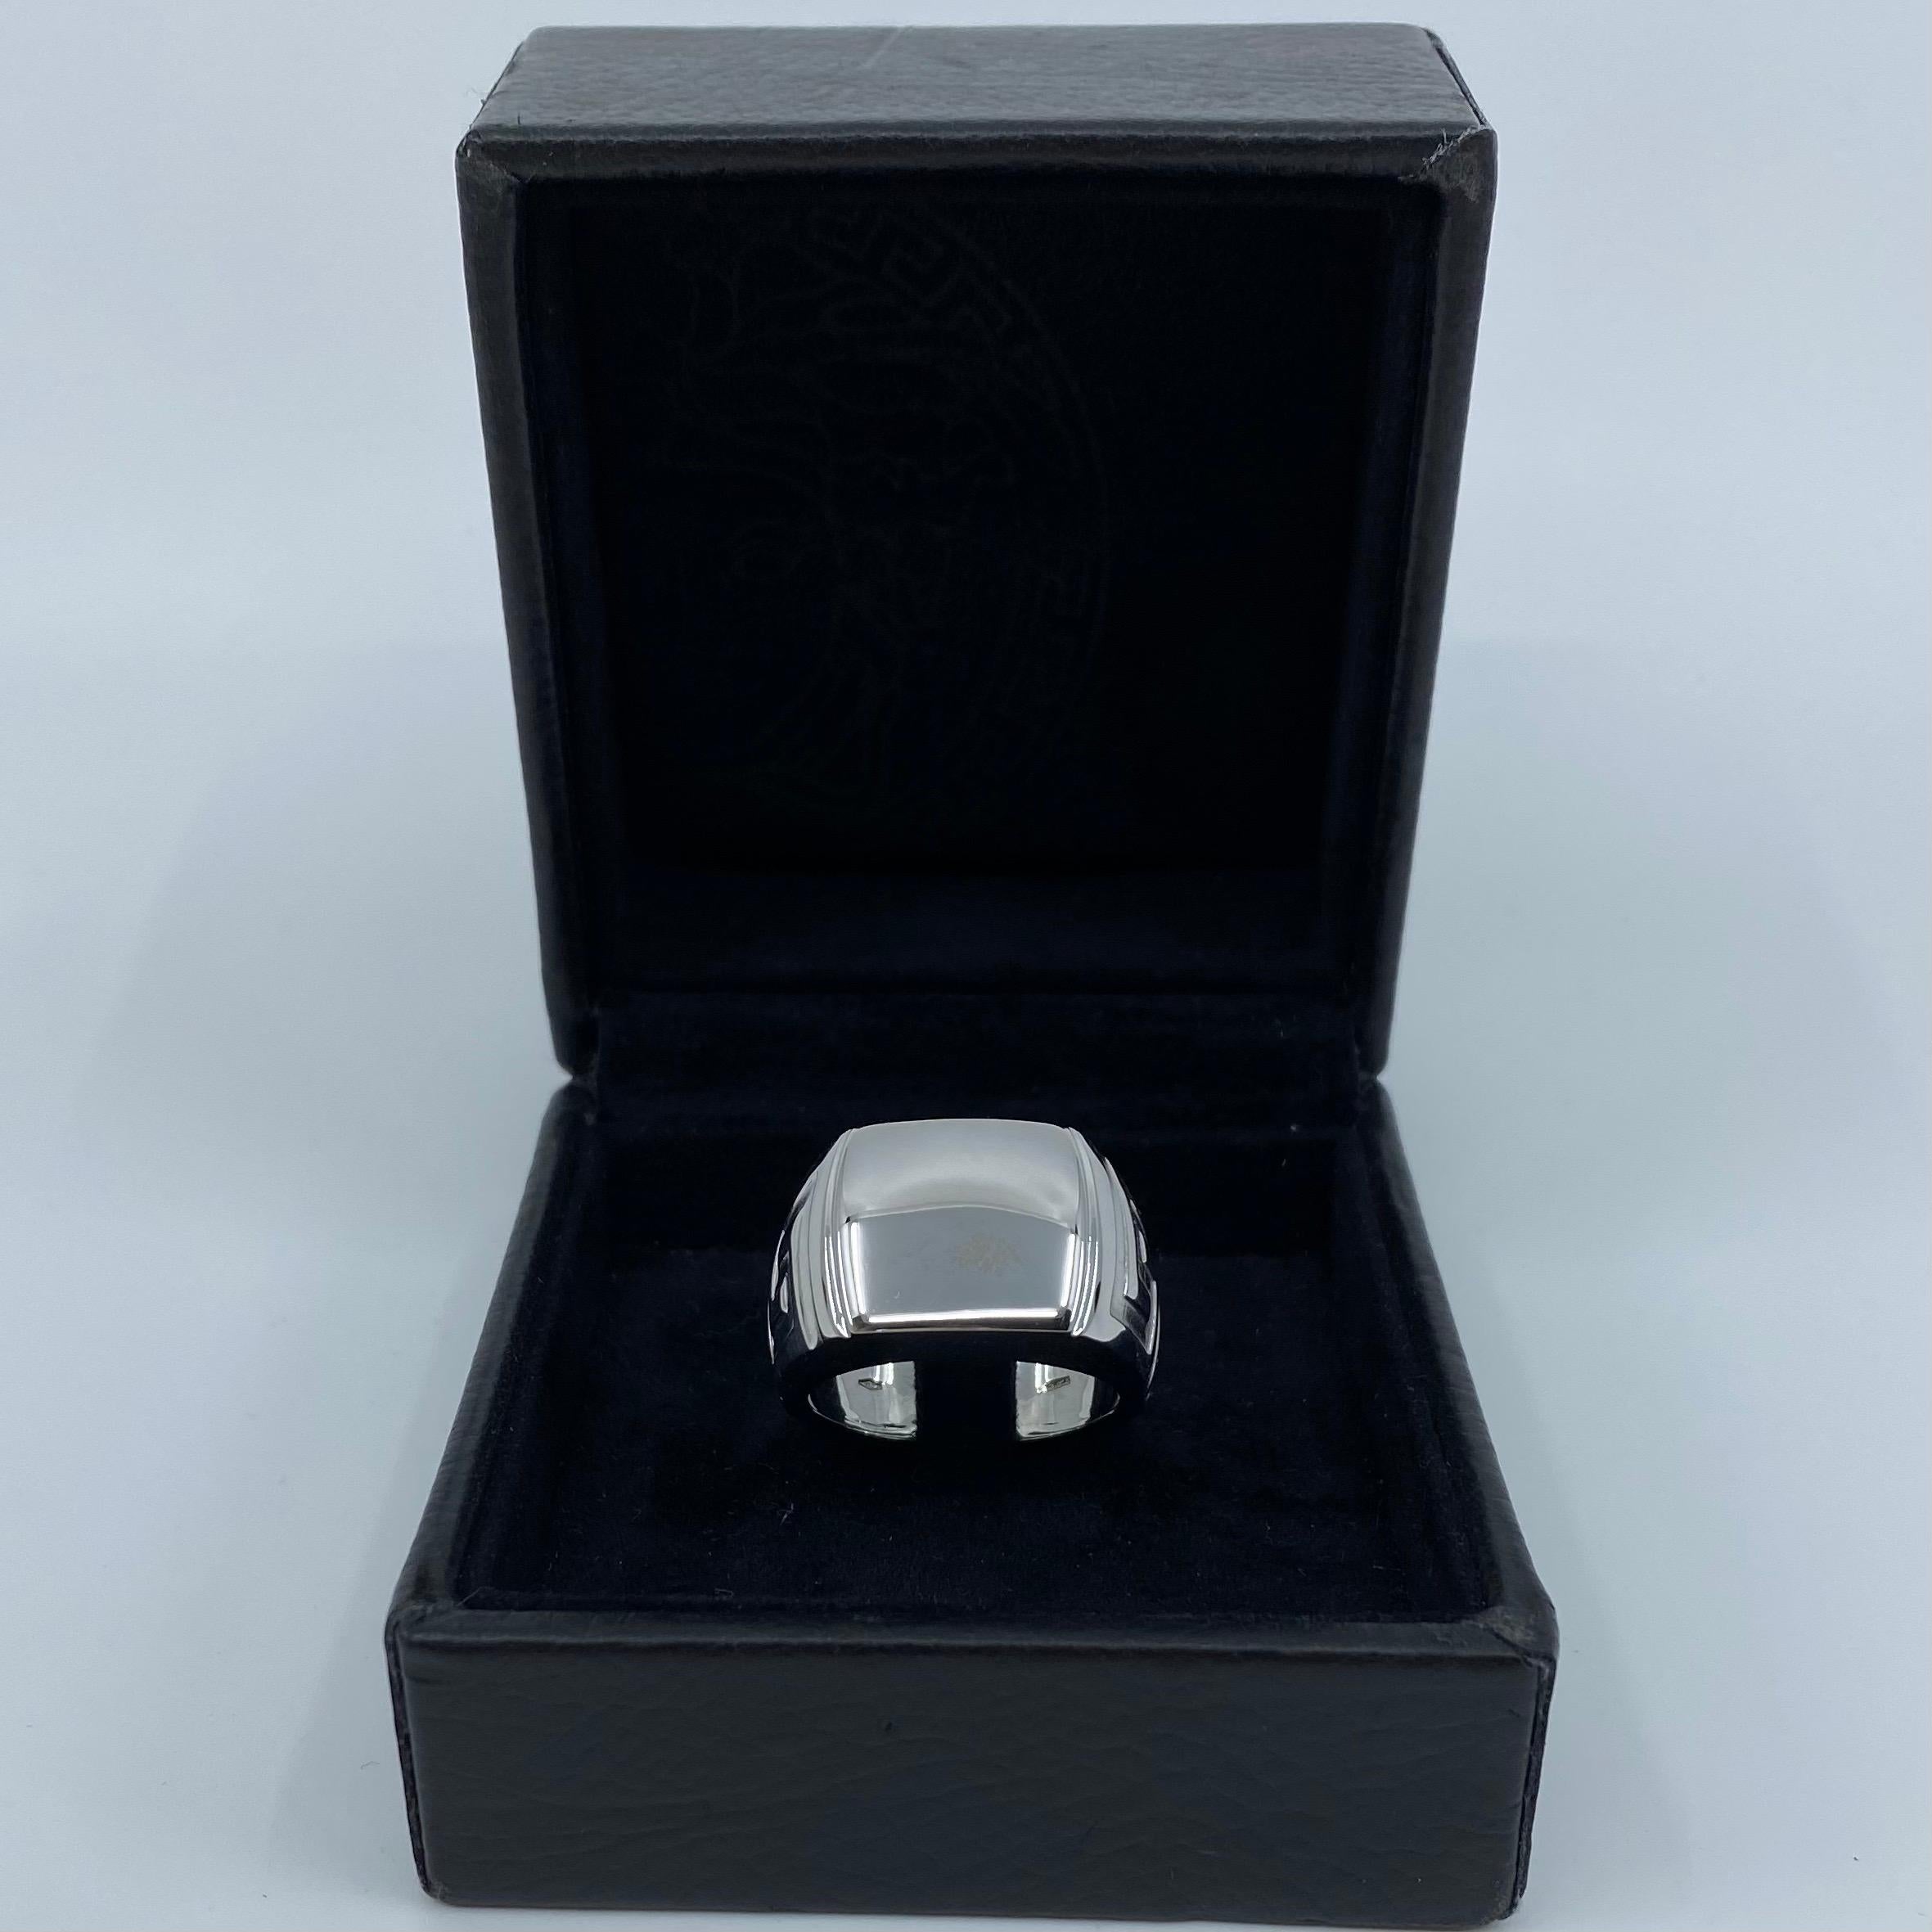 Rare Versace 18k White Gold Signet Dome Gents Ring.

A beautiful and well made, solid 18k white gold Versace ring with Greek Key symbols on the side, Versace logo and a plain dome top. This top can be left plain or even customised with engraving if